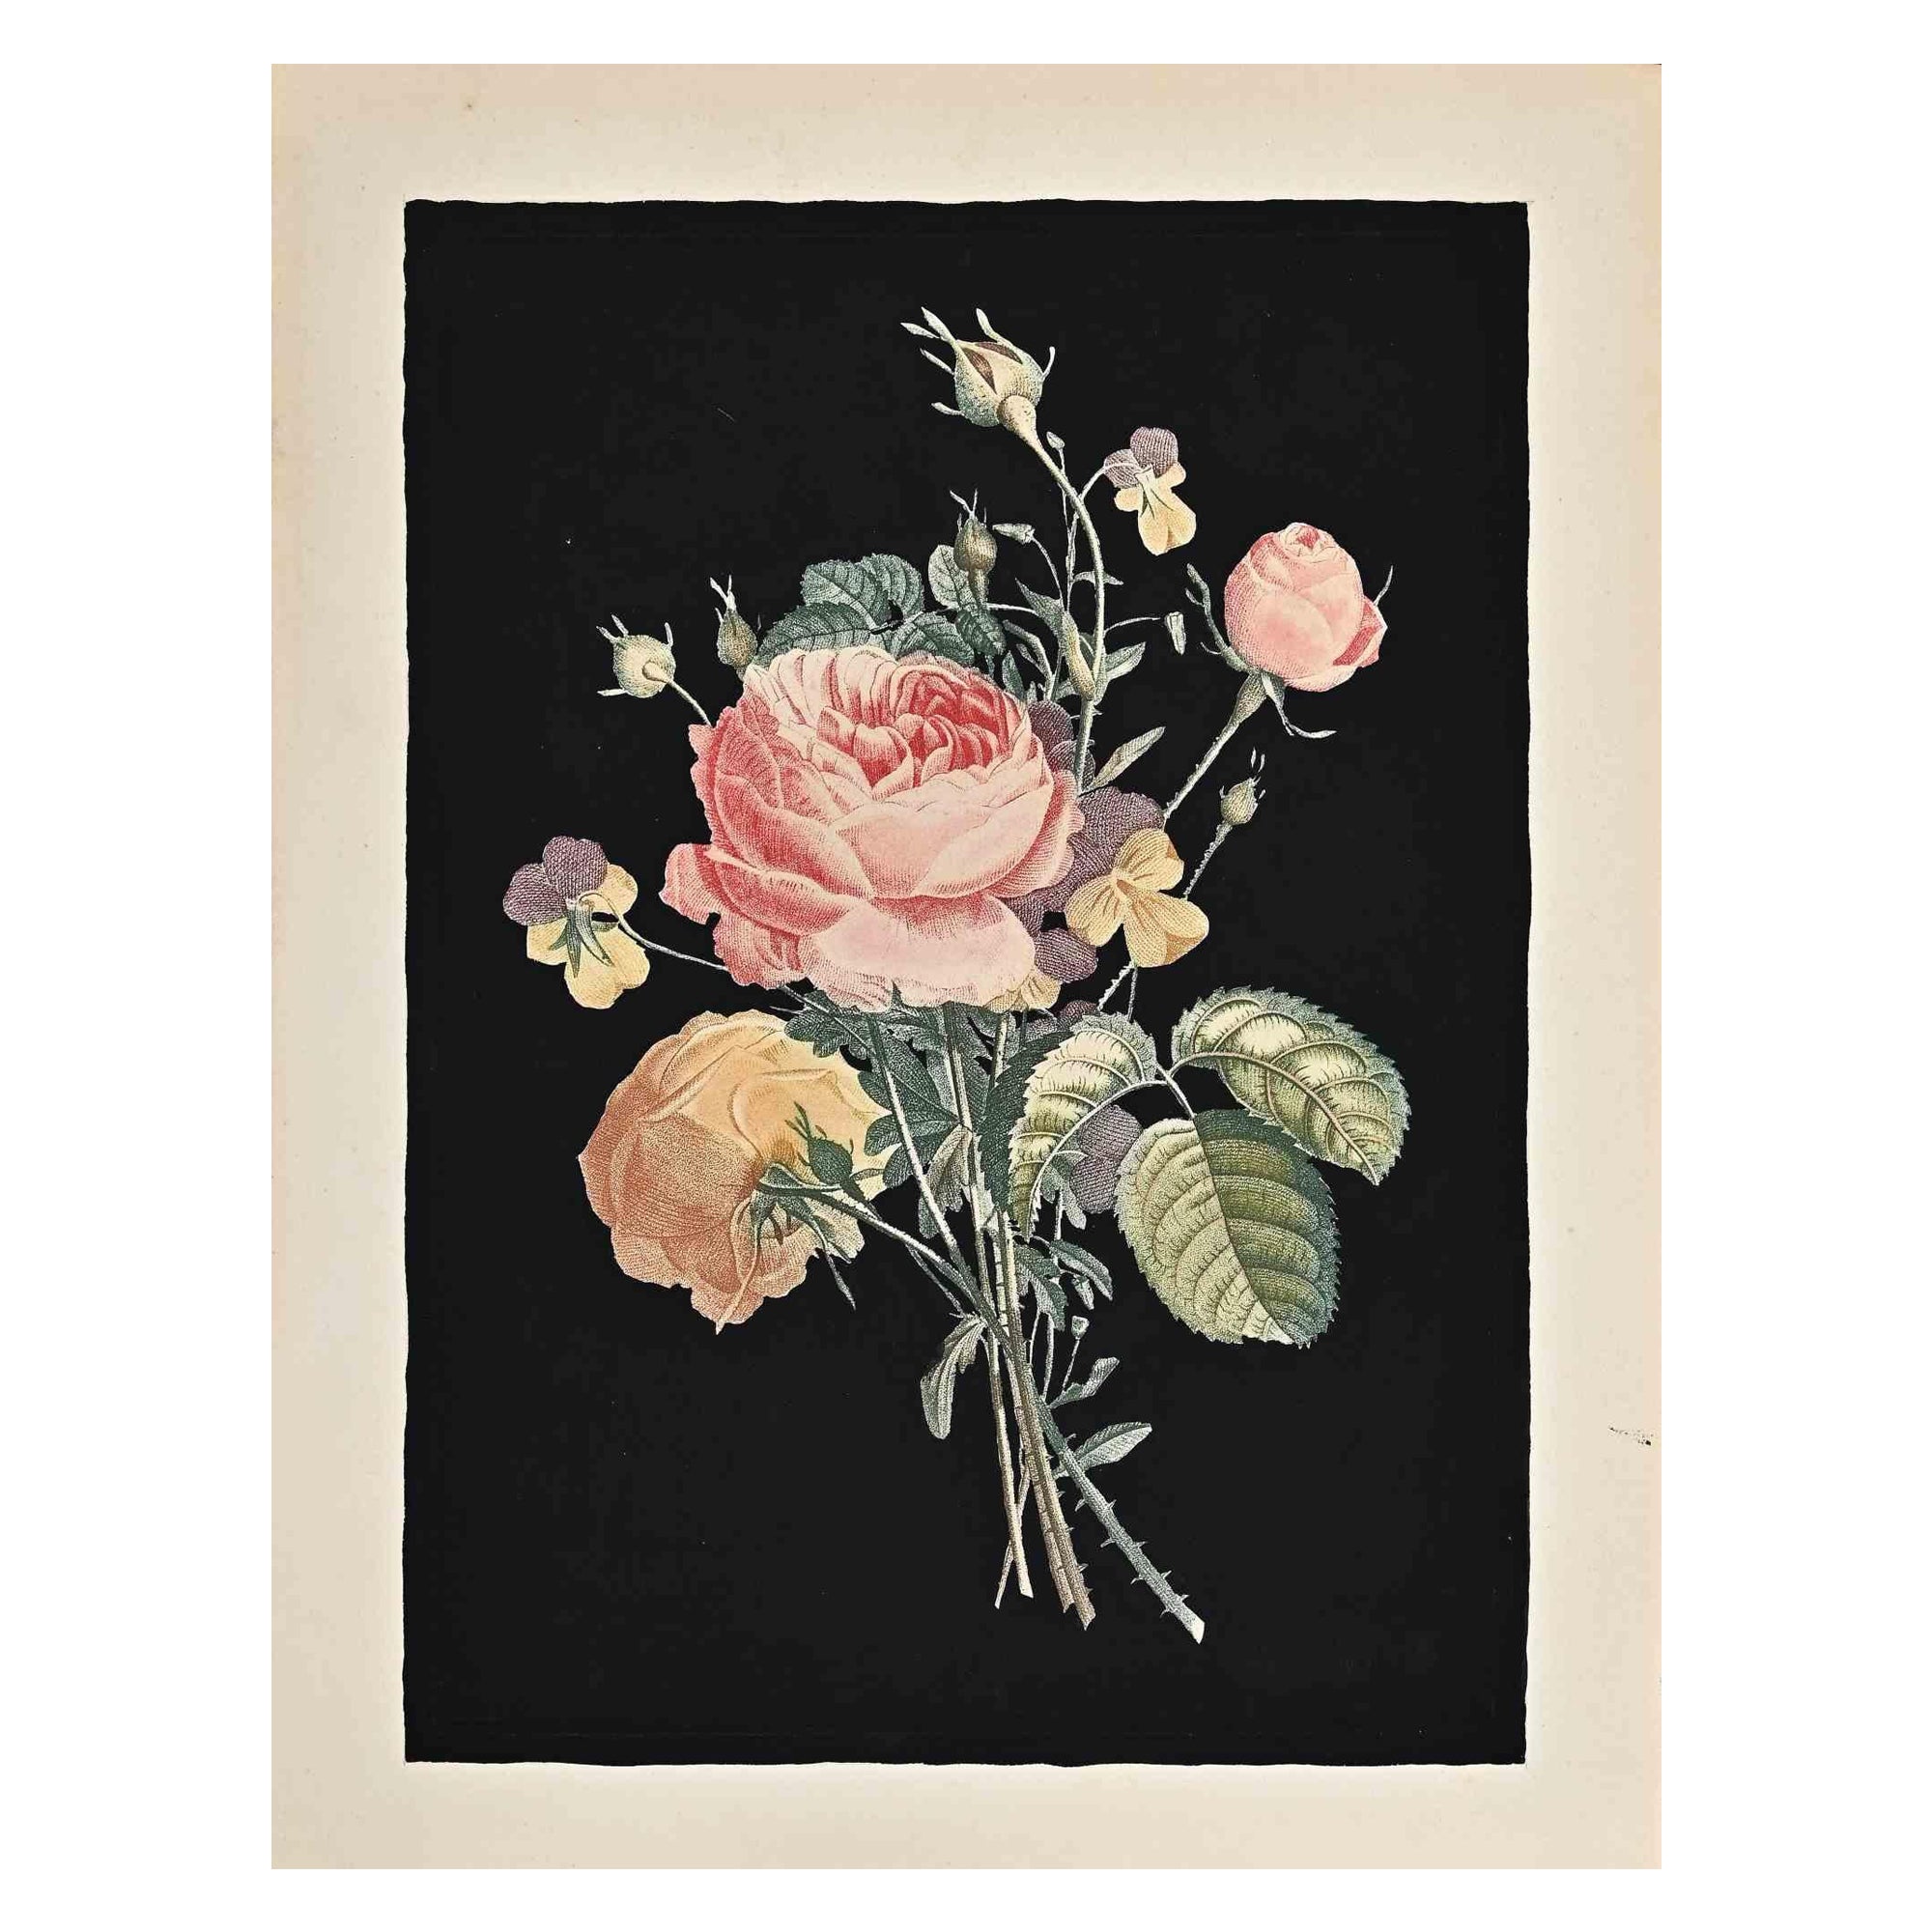 Rose is an oiginal artwork realized by François Langlois after Pierre-Joseph Redouté.

Not signed.

Original etching.

Good conditions apart some tears along the left and right side.

